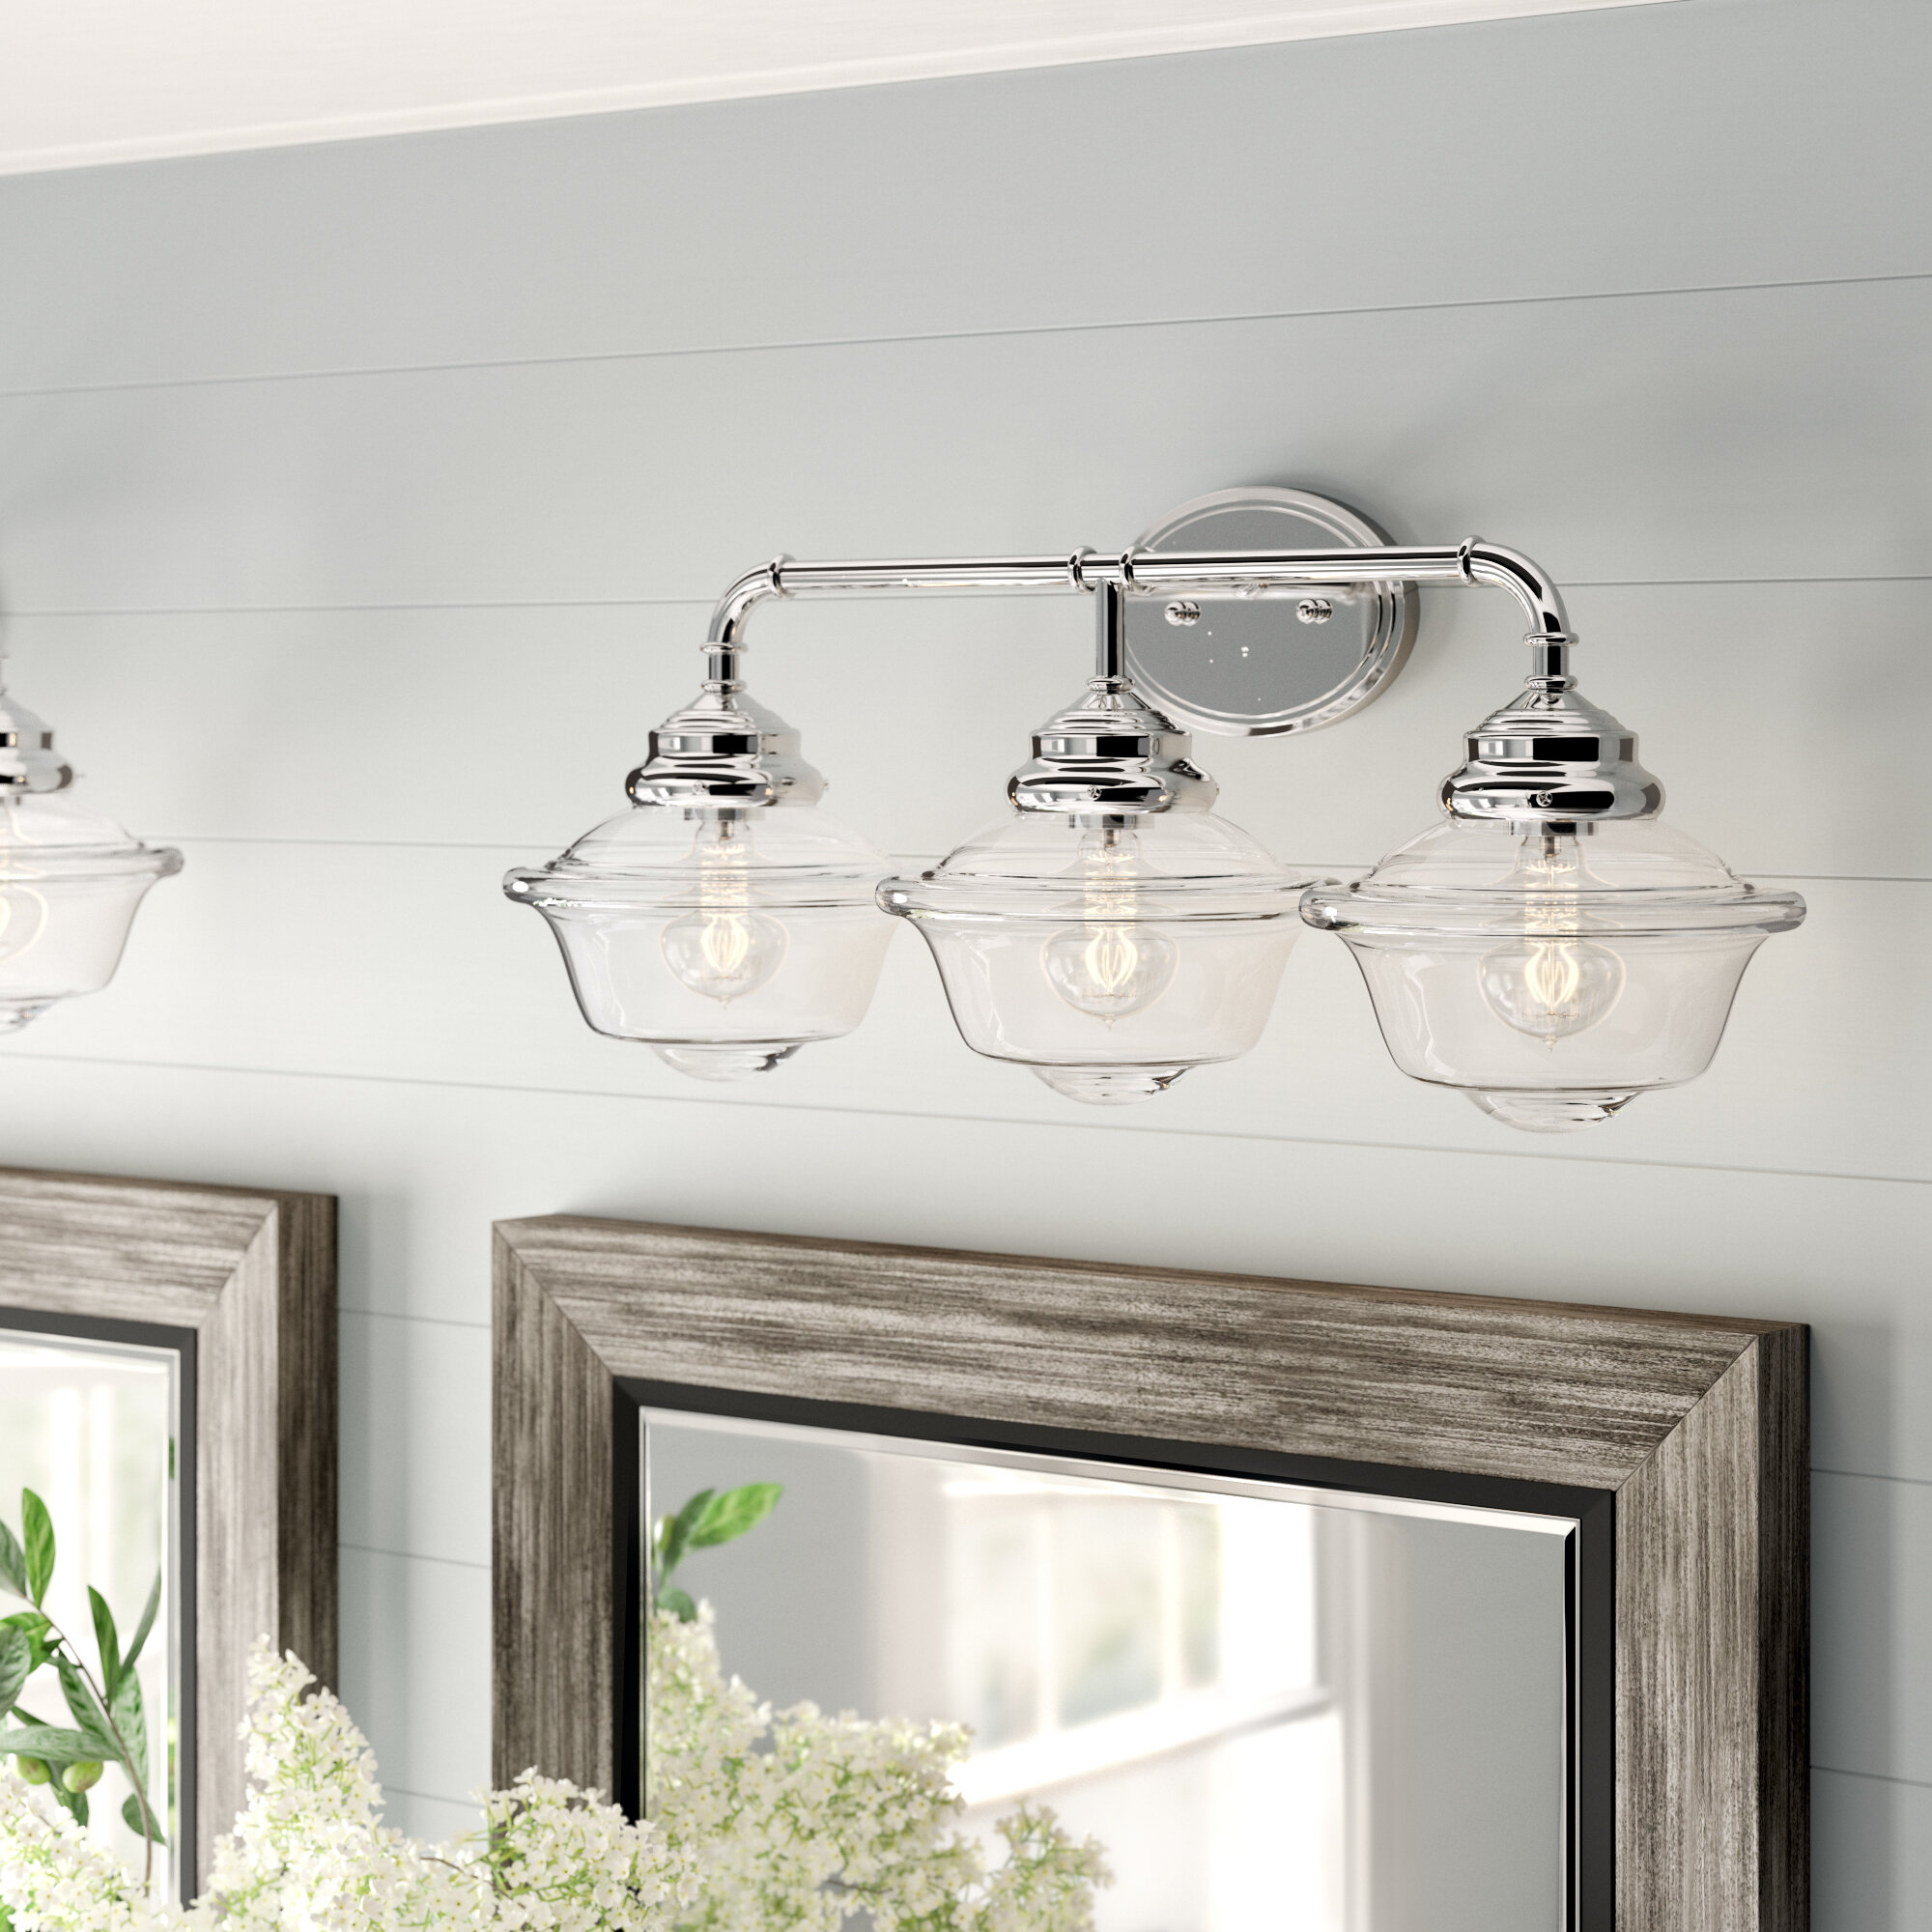 Bathroom Light Fixtures How To Choose The Right One Wayfair